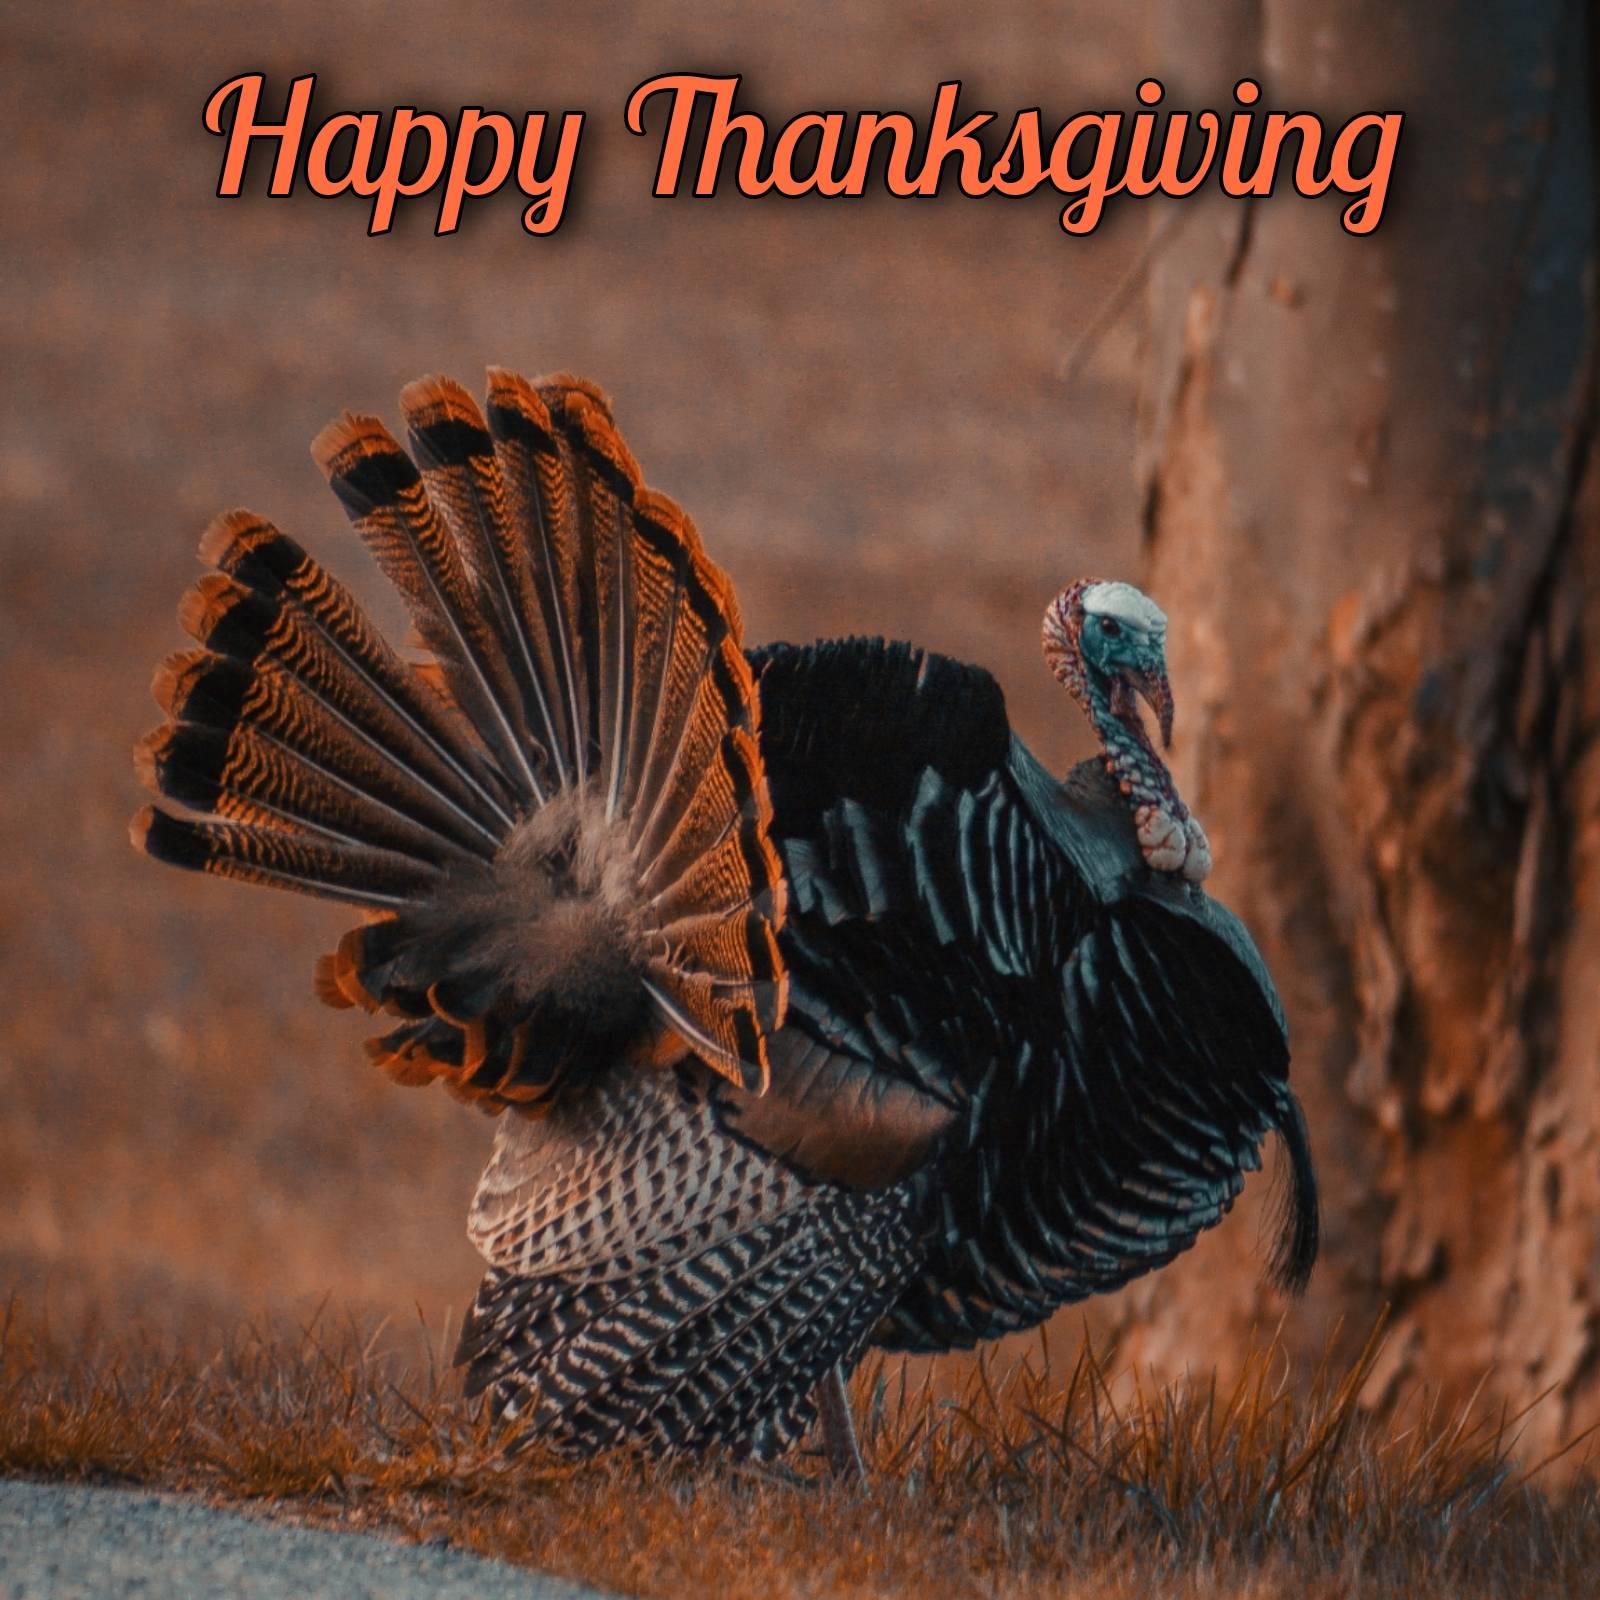 Happy Thanksgiving 2021 Turkey Images